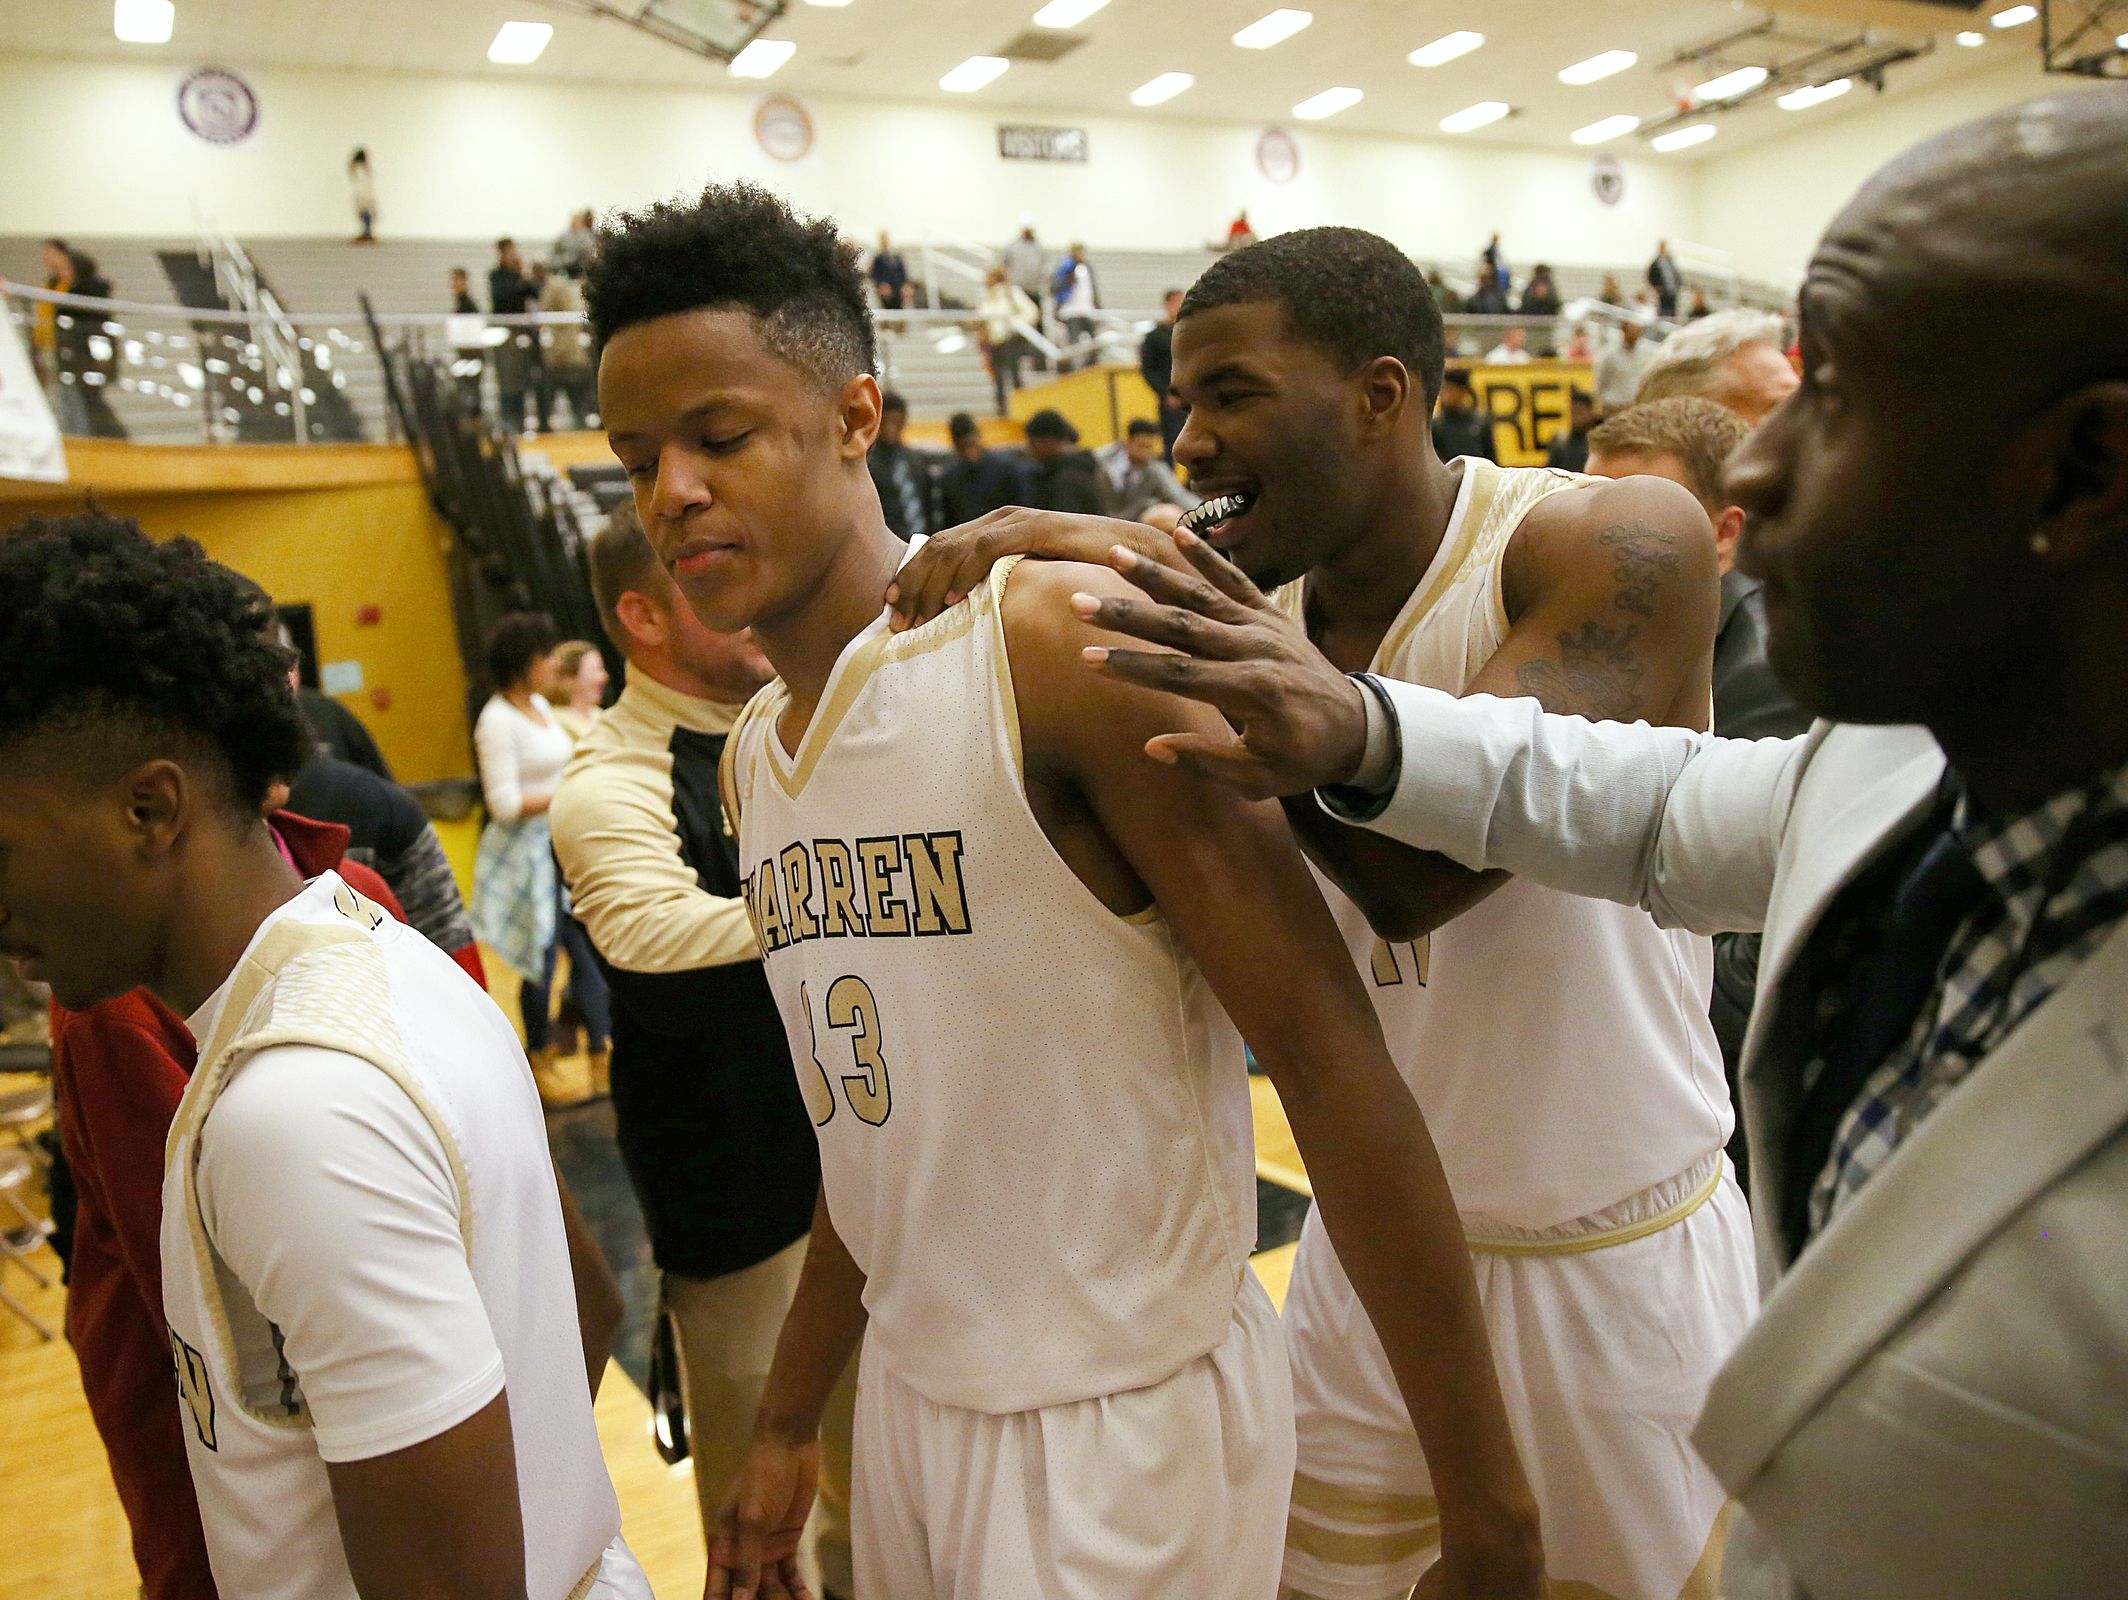 Warren Central Warrior Ki-ng Tyler (33) is congratulated after Warren Central won Marion County boys quarterfinals at Warren Central High School, Indianapolis, Wednesday, Jan. 11, 2016. Warren Central defeated Lawrence North, 52-43.